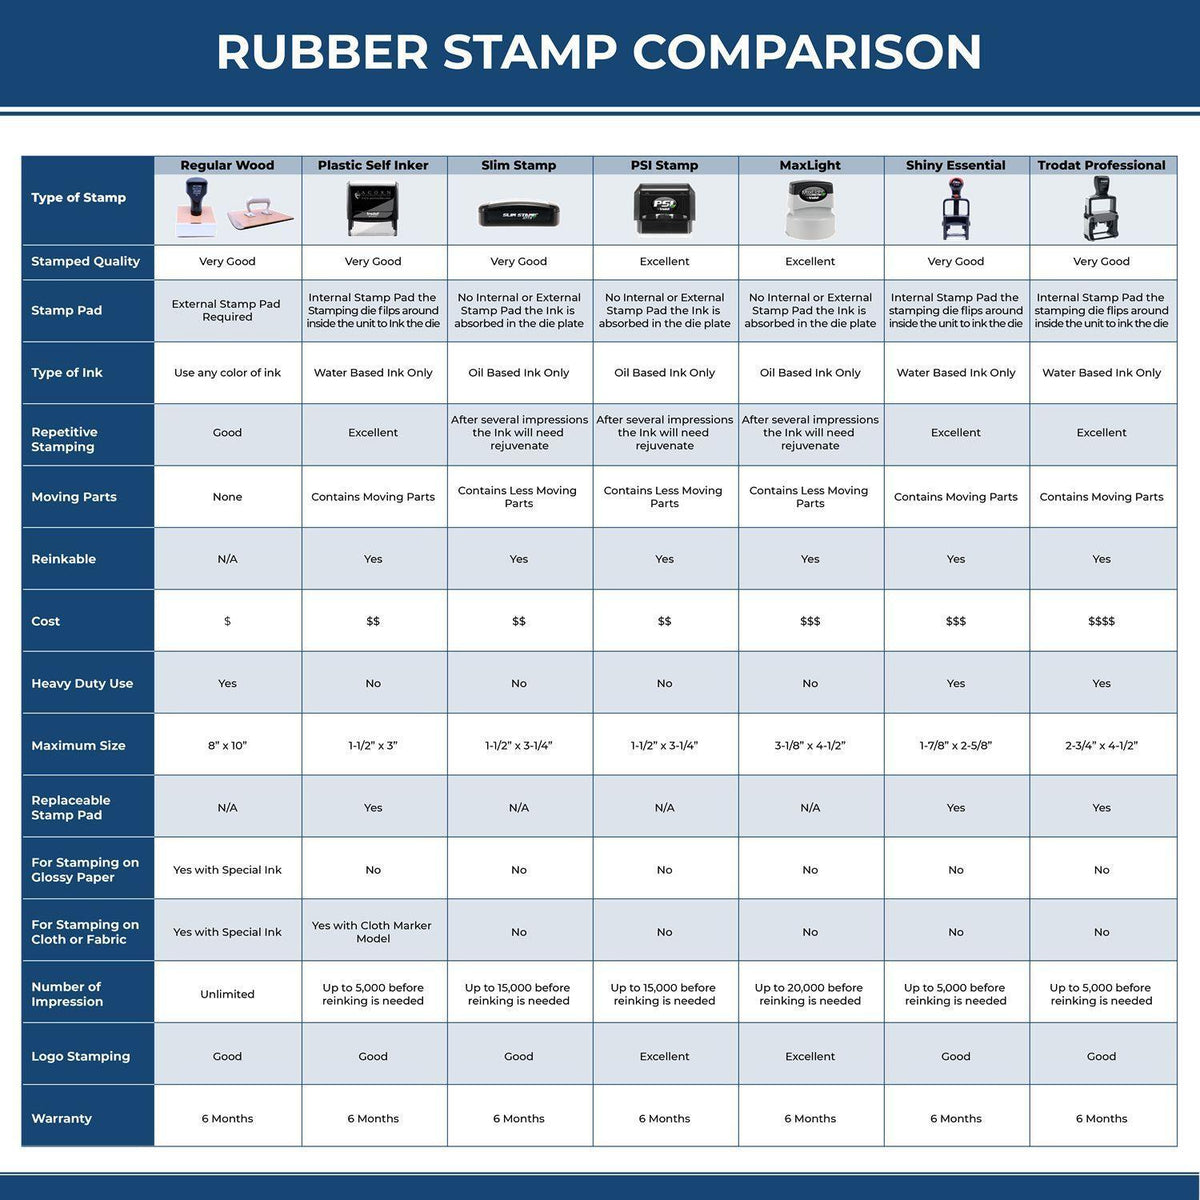 Large Pre-Inked Economy Rate Stamp 4851SLIM Rubber Stamp Comparison